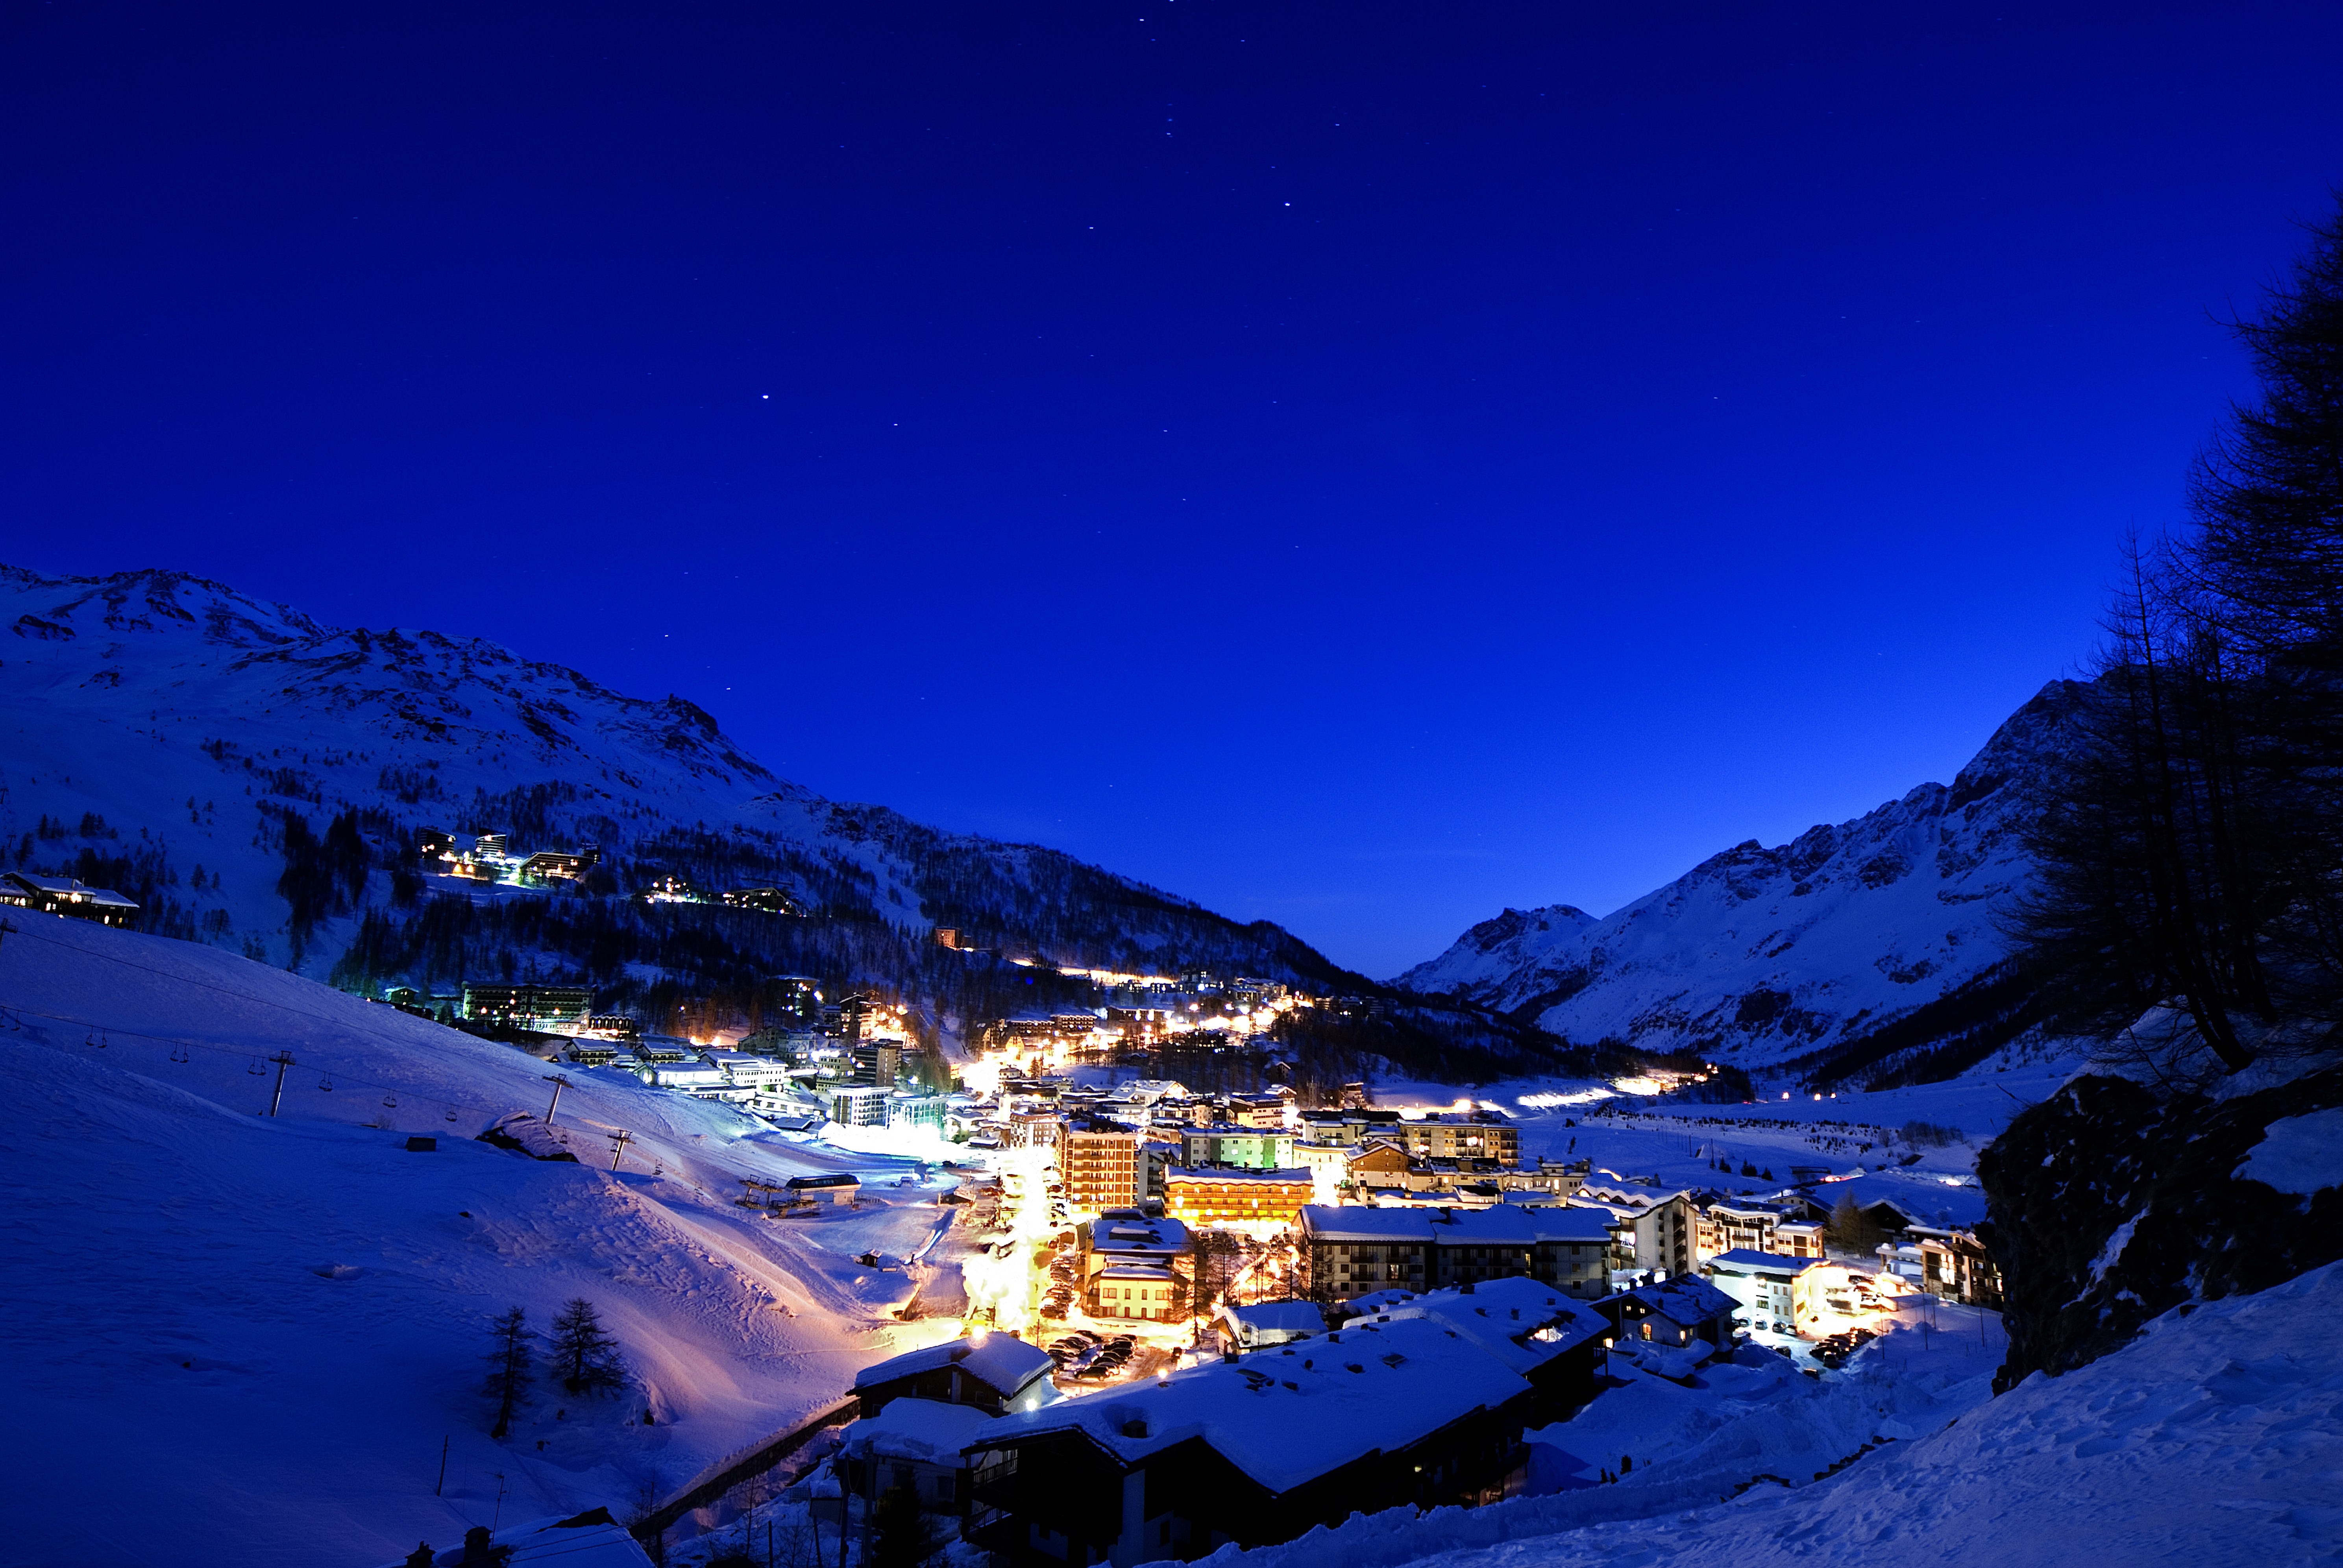 Ski Resort Of Cervinia Italy Wallpaper And Image